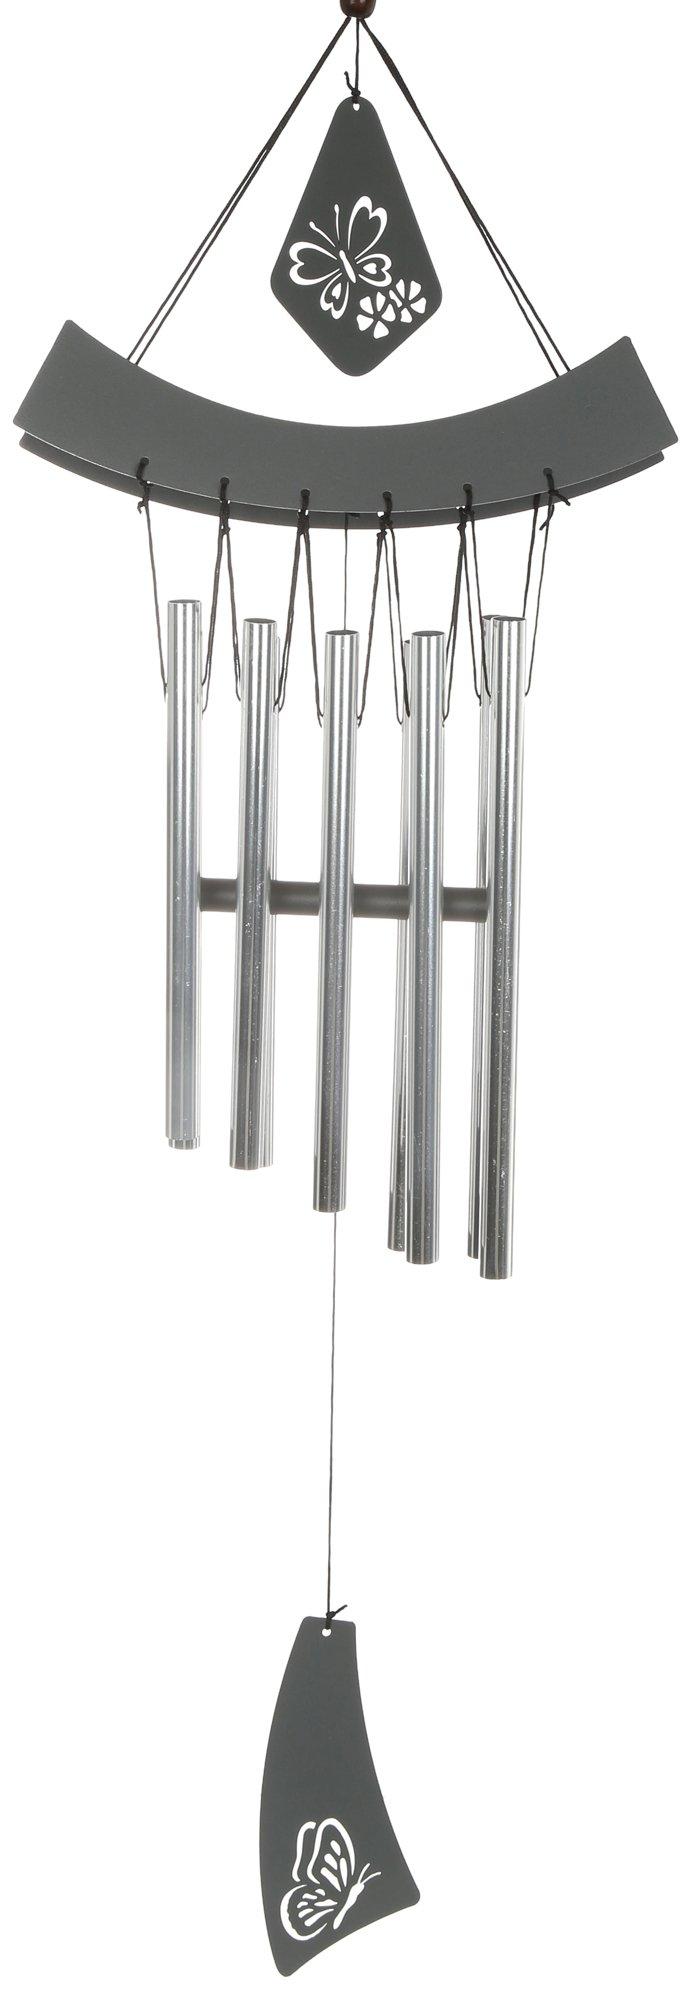 30 in Metal Wind Chime